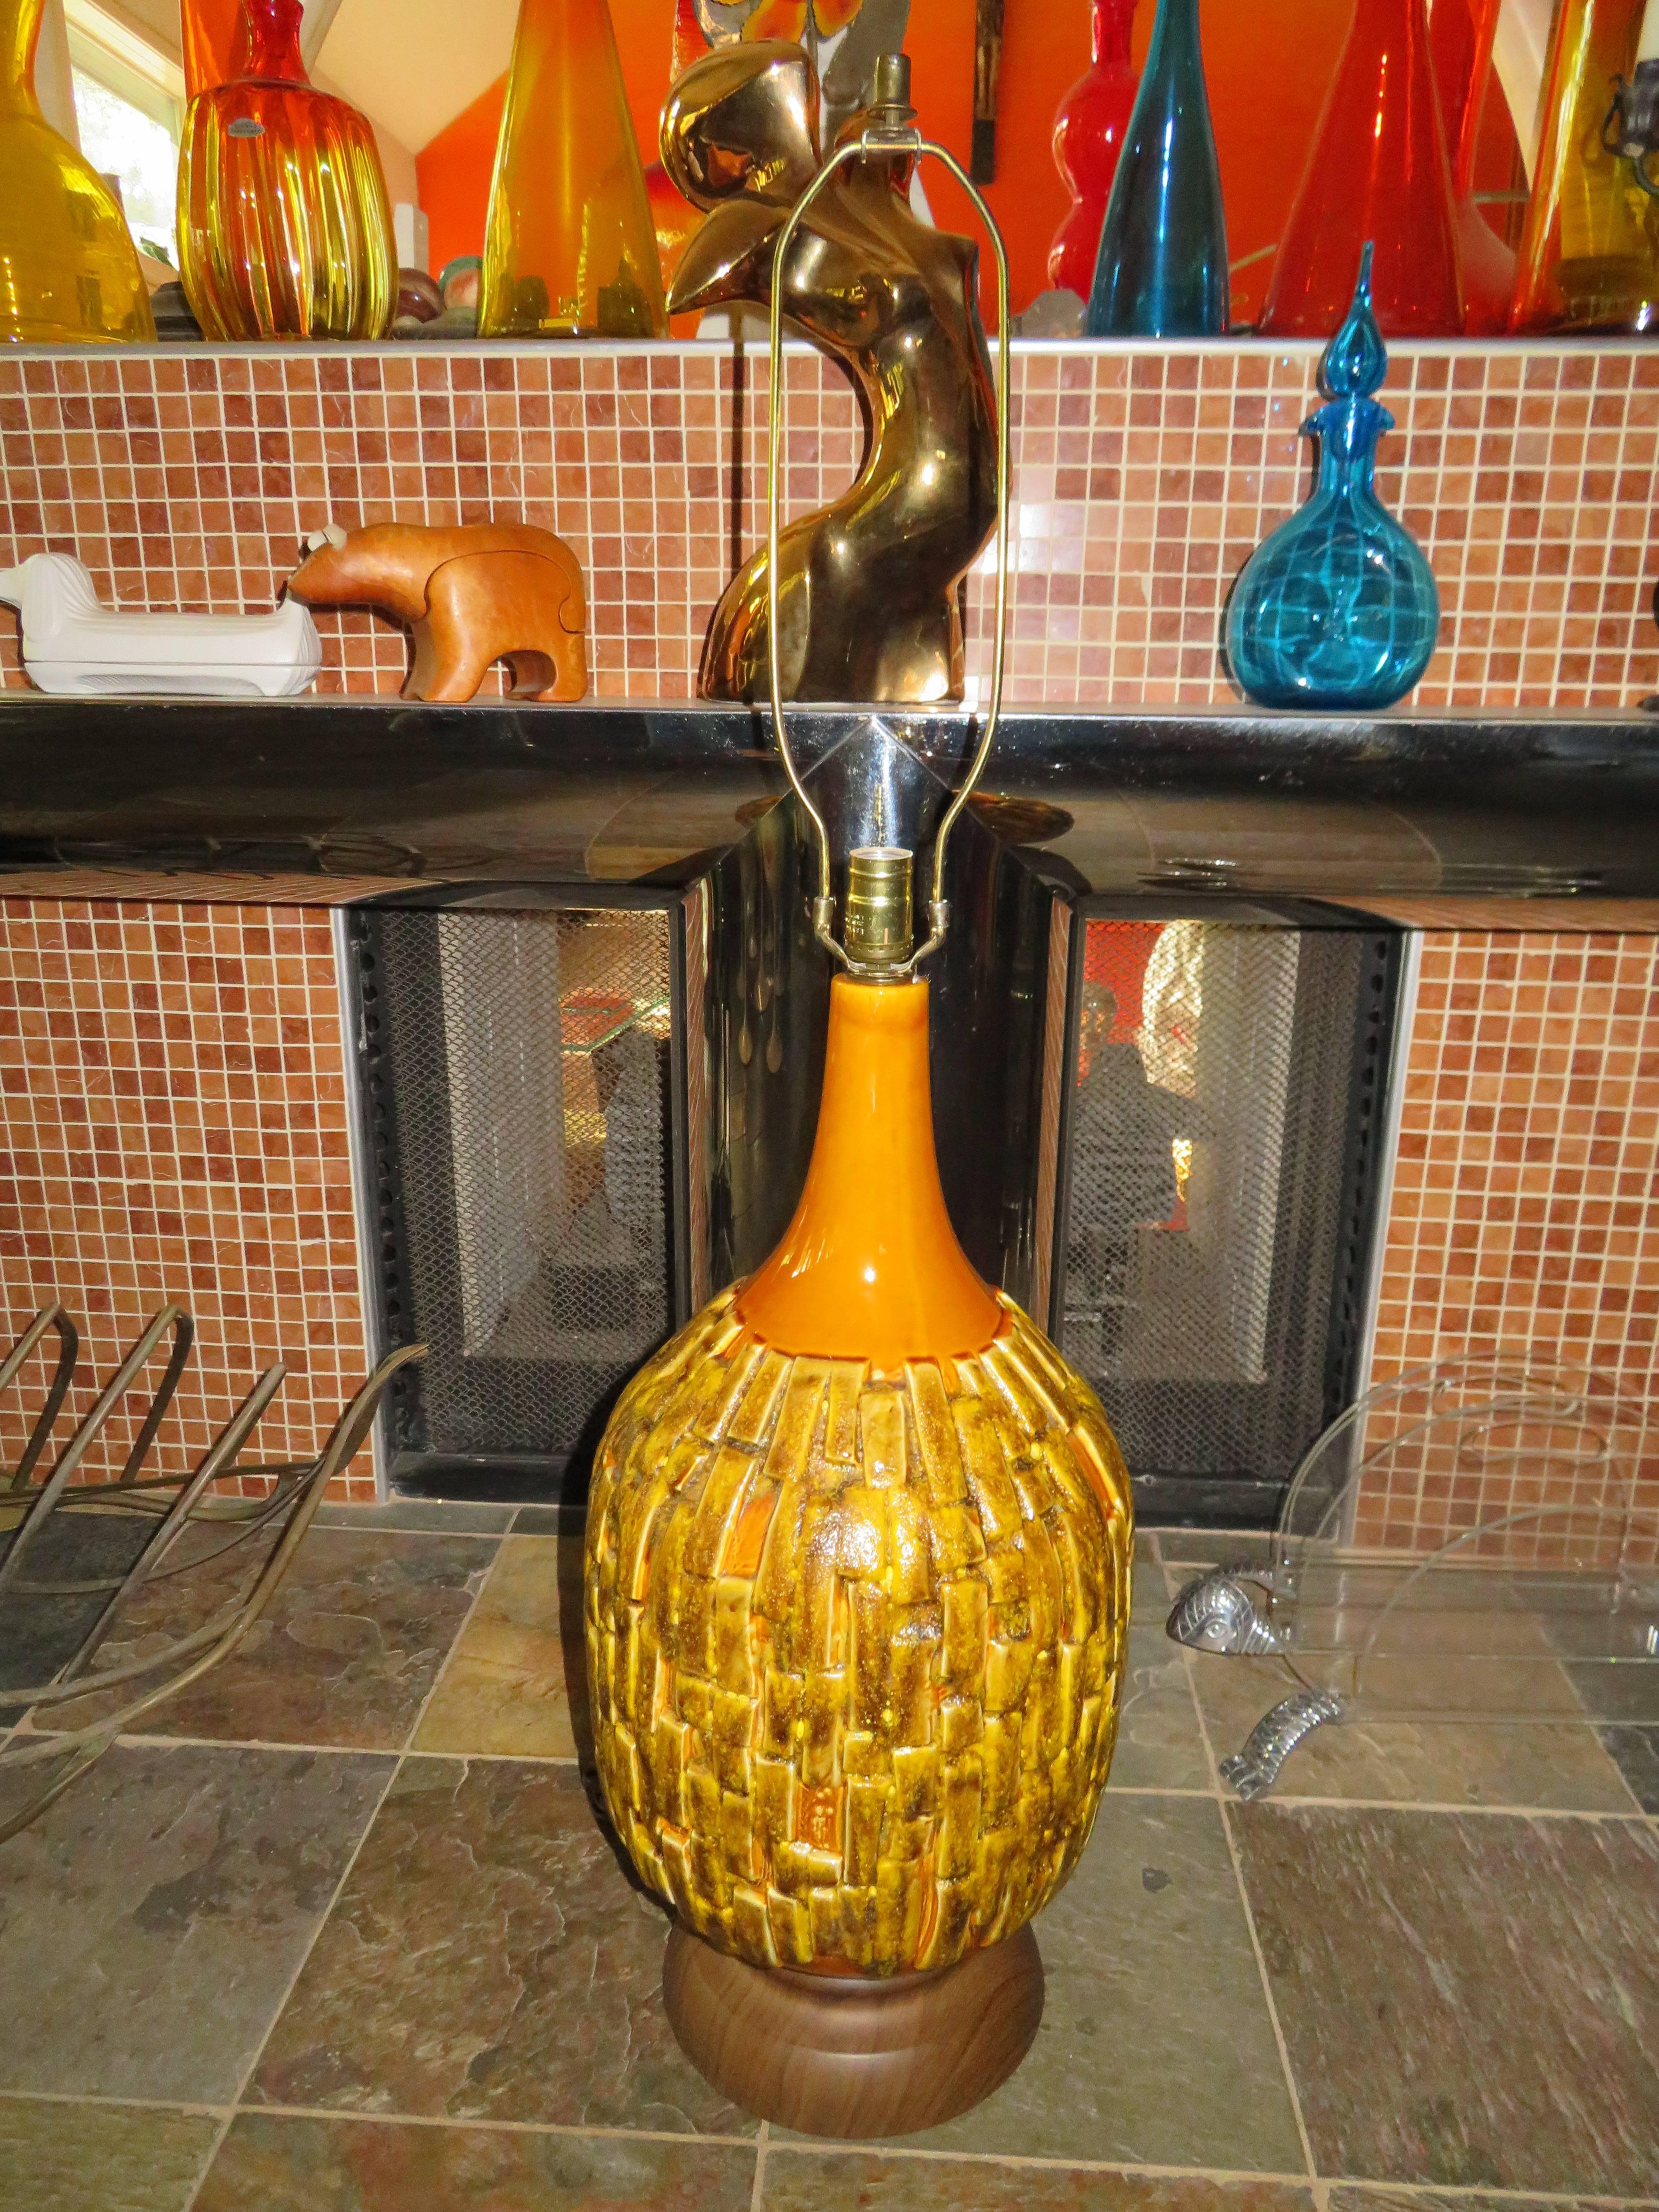 Fabulous large-scale textured Brutalist lamp with wonderful golden glaze. This lamp has tons of chunky textured layers with a great golden orange color and touches of chocolate throughout. We love the super large-scale measuring a whopping 42